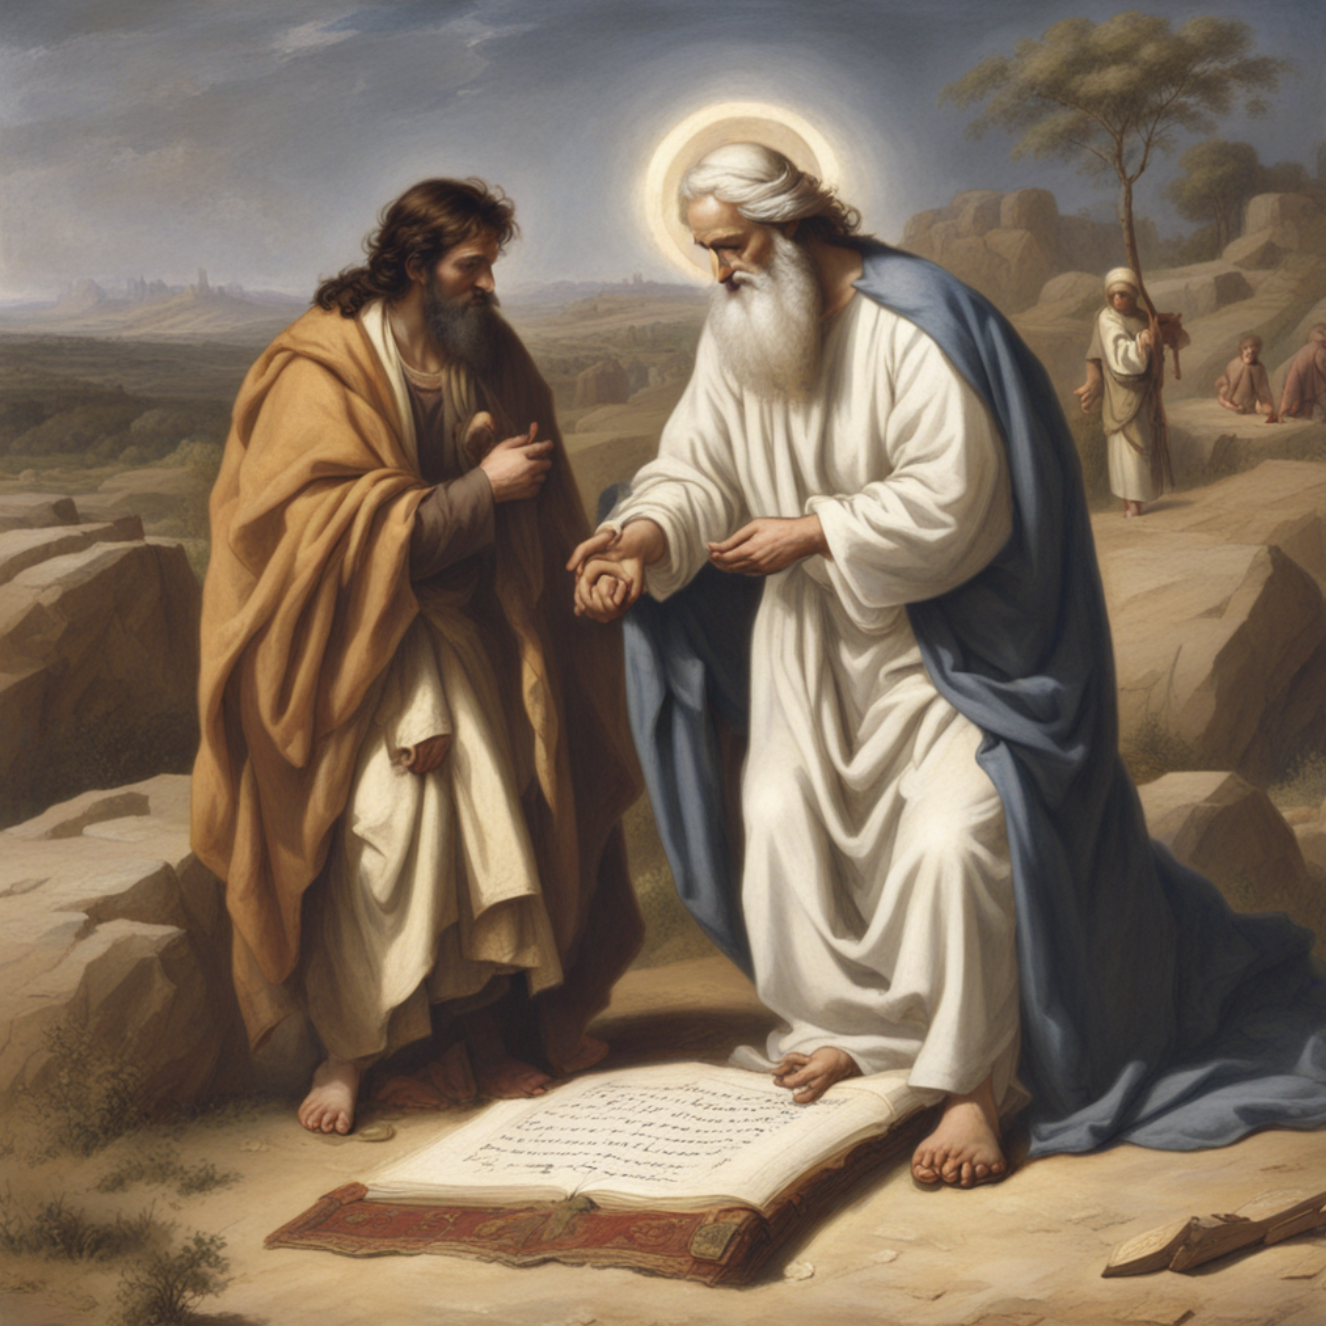 Why was Abram's name changed to Abraham? (Genesis 17:5)